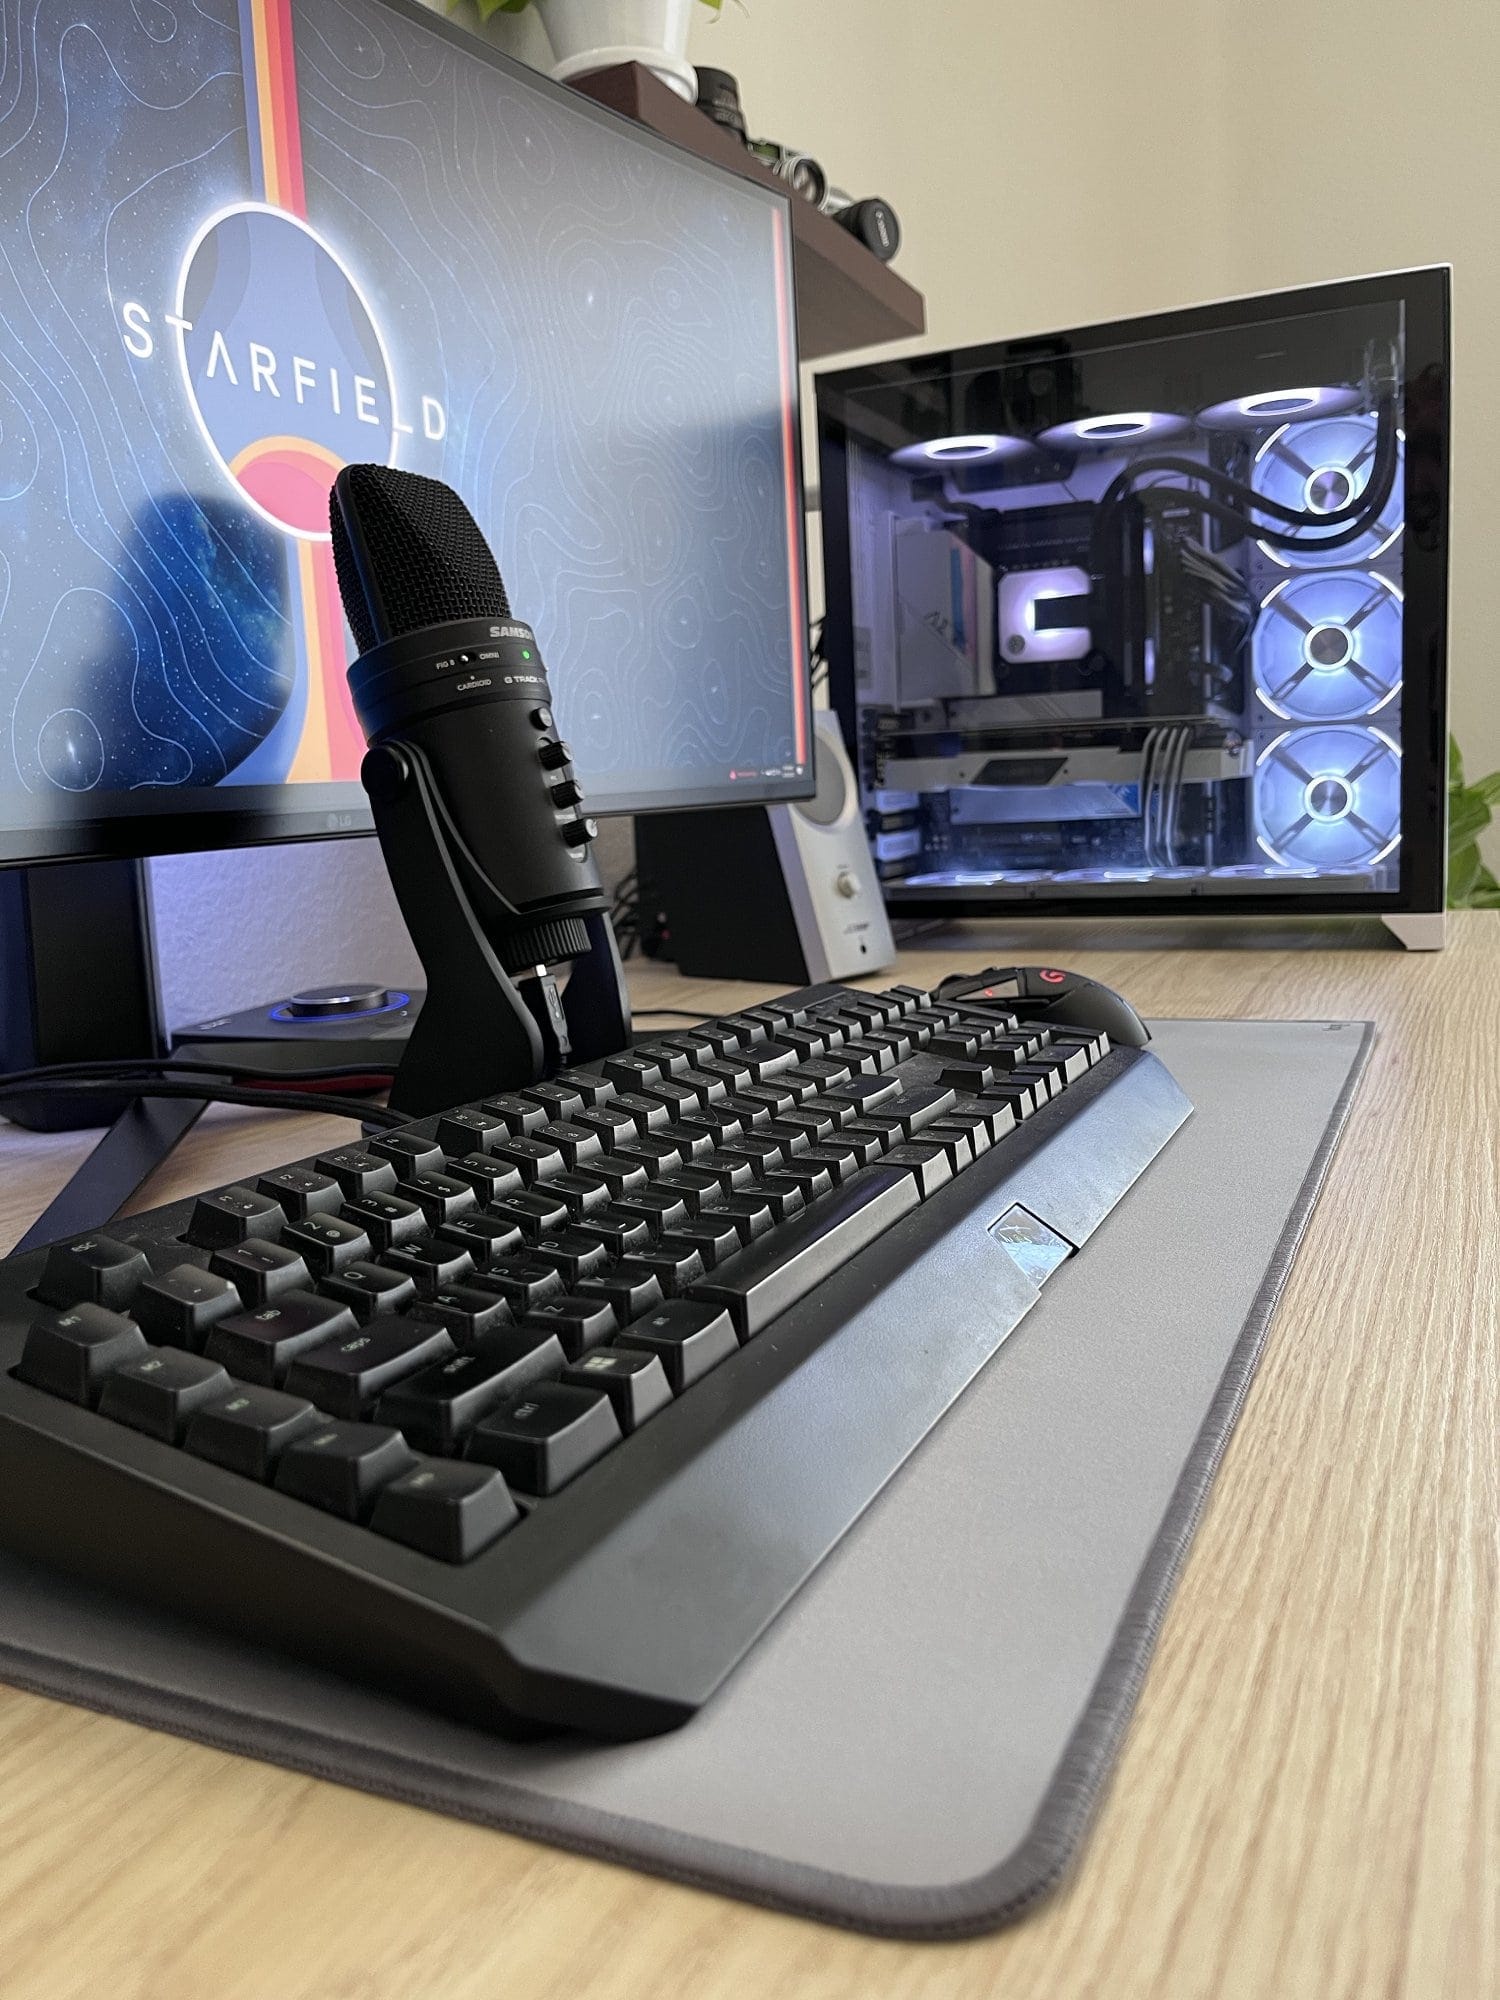  A close-up of a mechanical keyboard and a microphone on a desk, with a monitor displaying STARFIELD in the background and a PC with illuminated fans to the side